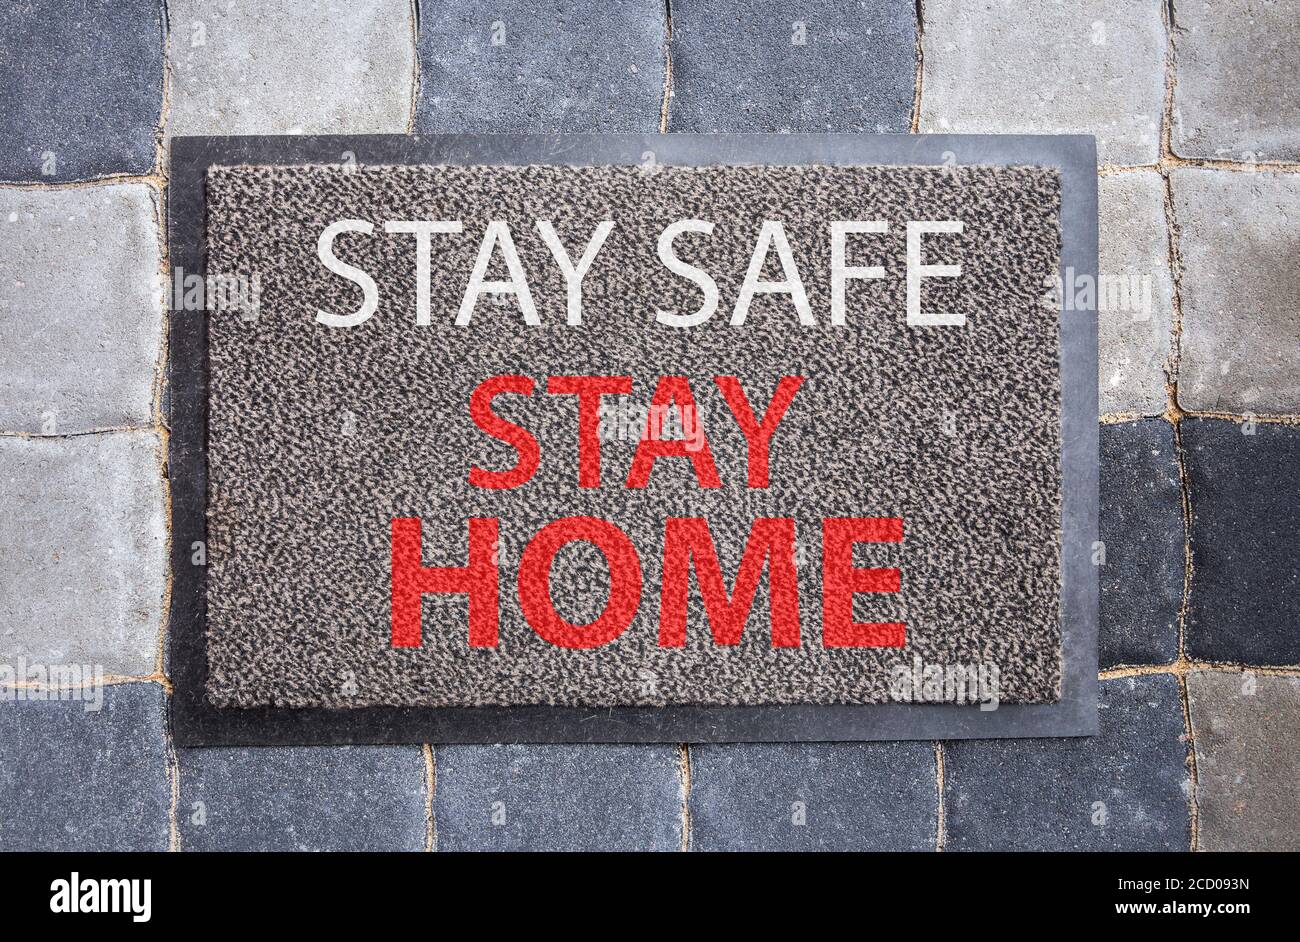 Disease avoid spread concept. Home doormat with text: Stay safe, stay home. Home decor with message. Stock Photo